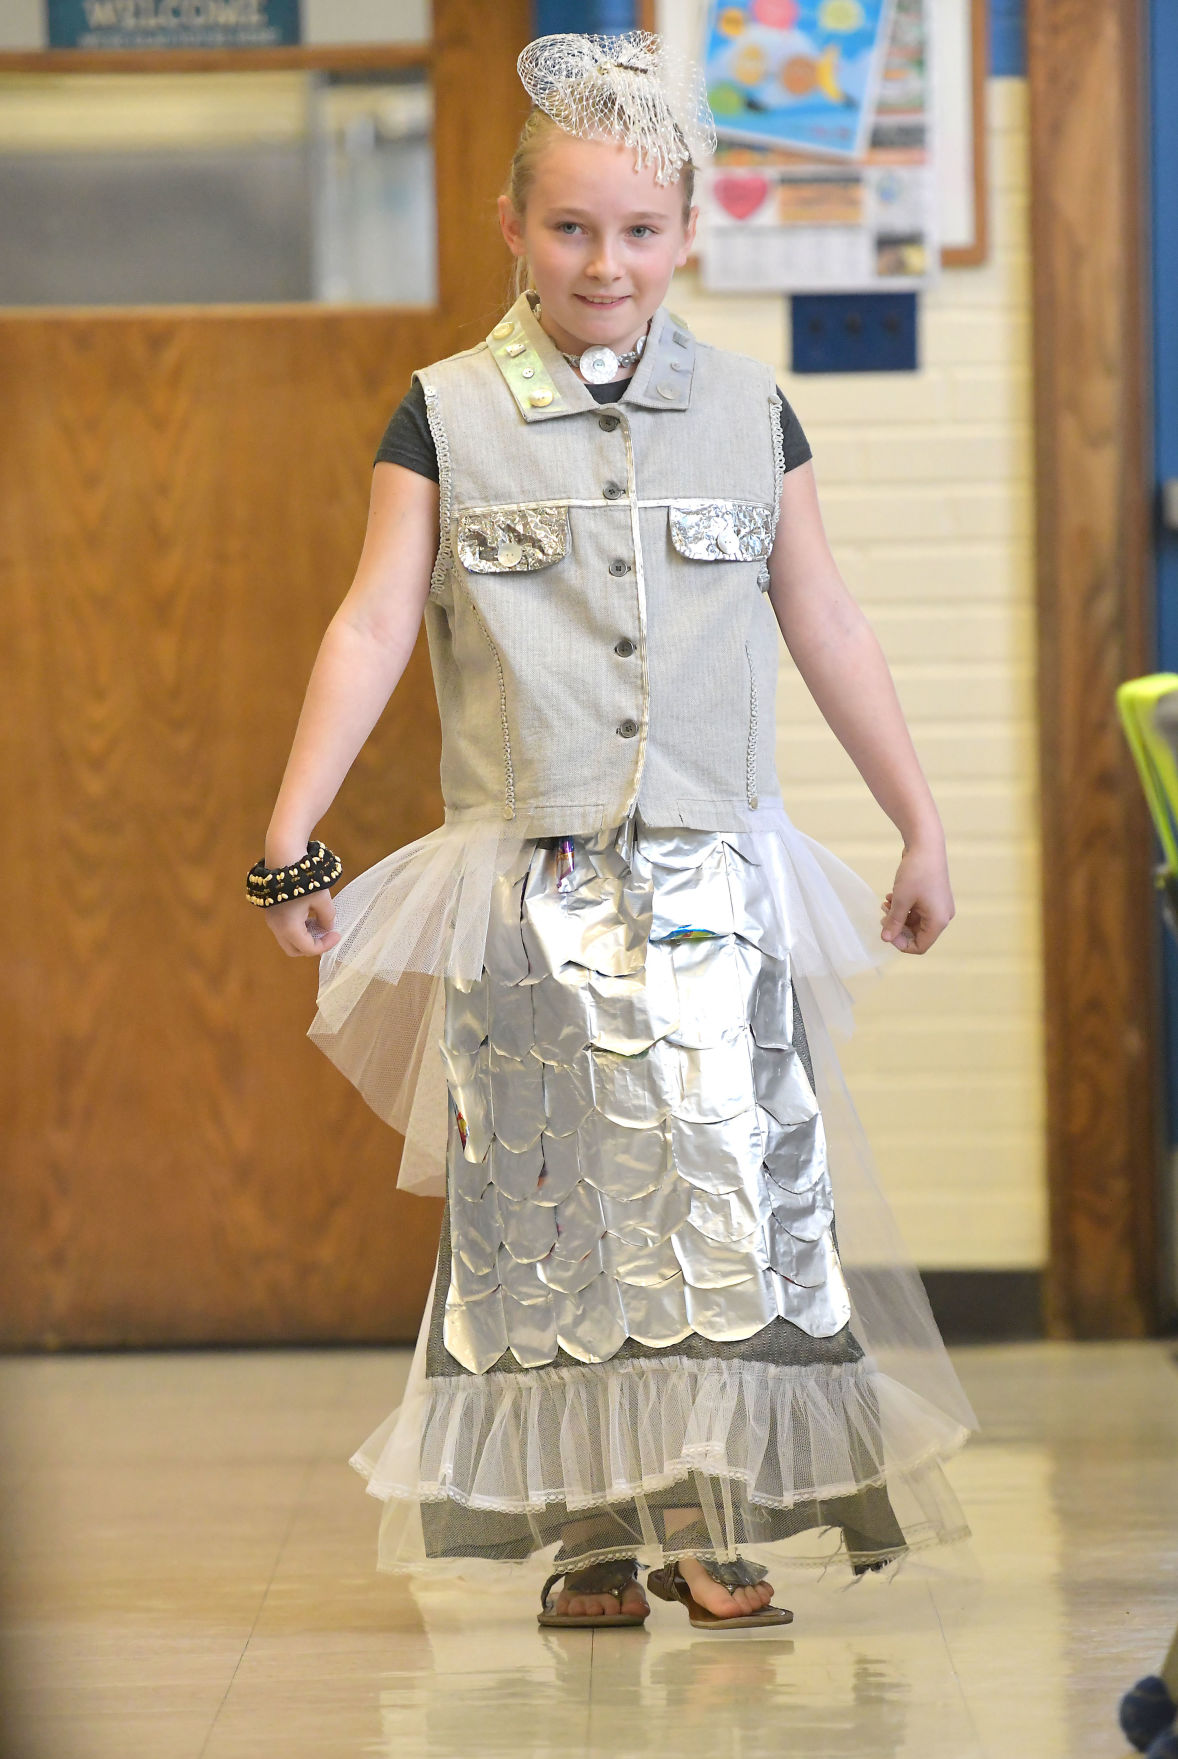 Students wear recyclables in the name of fashion (ASU)